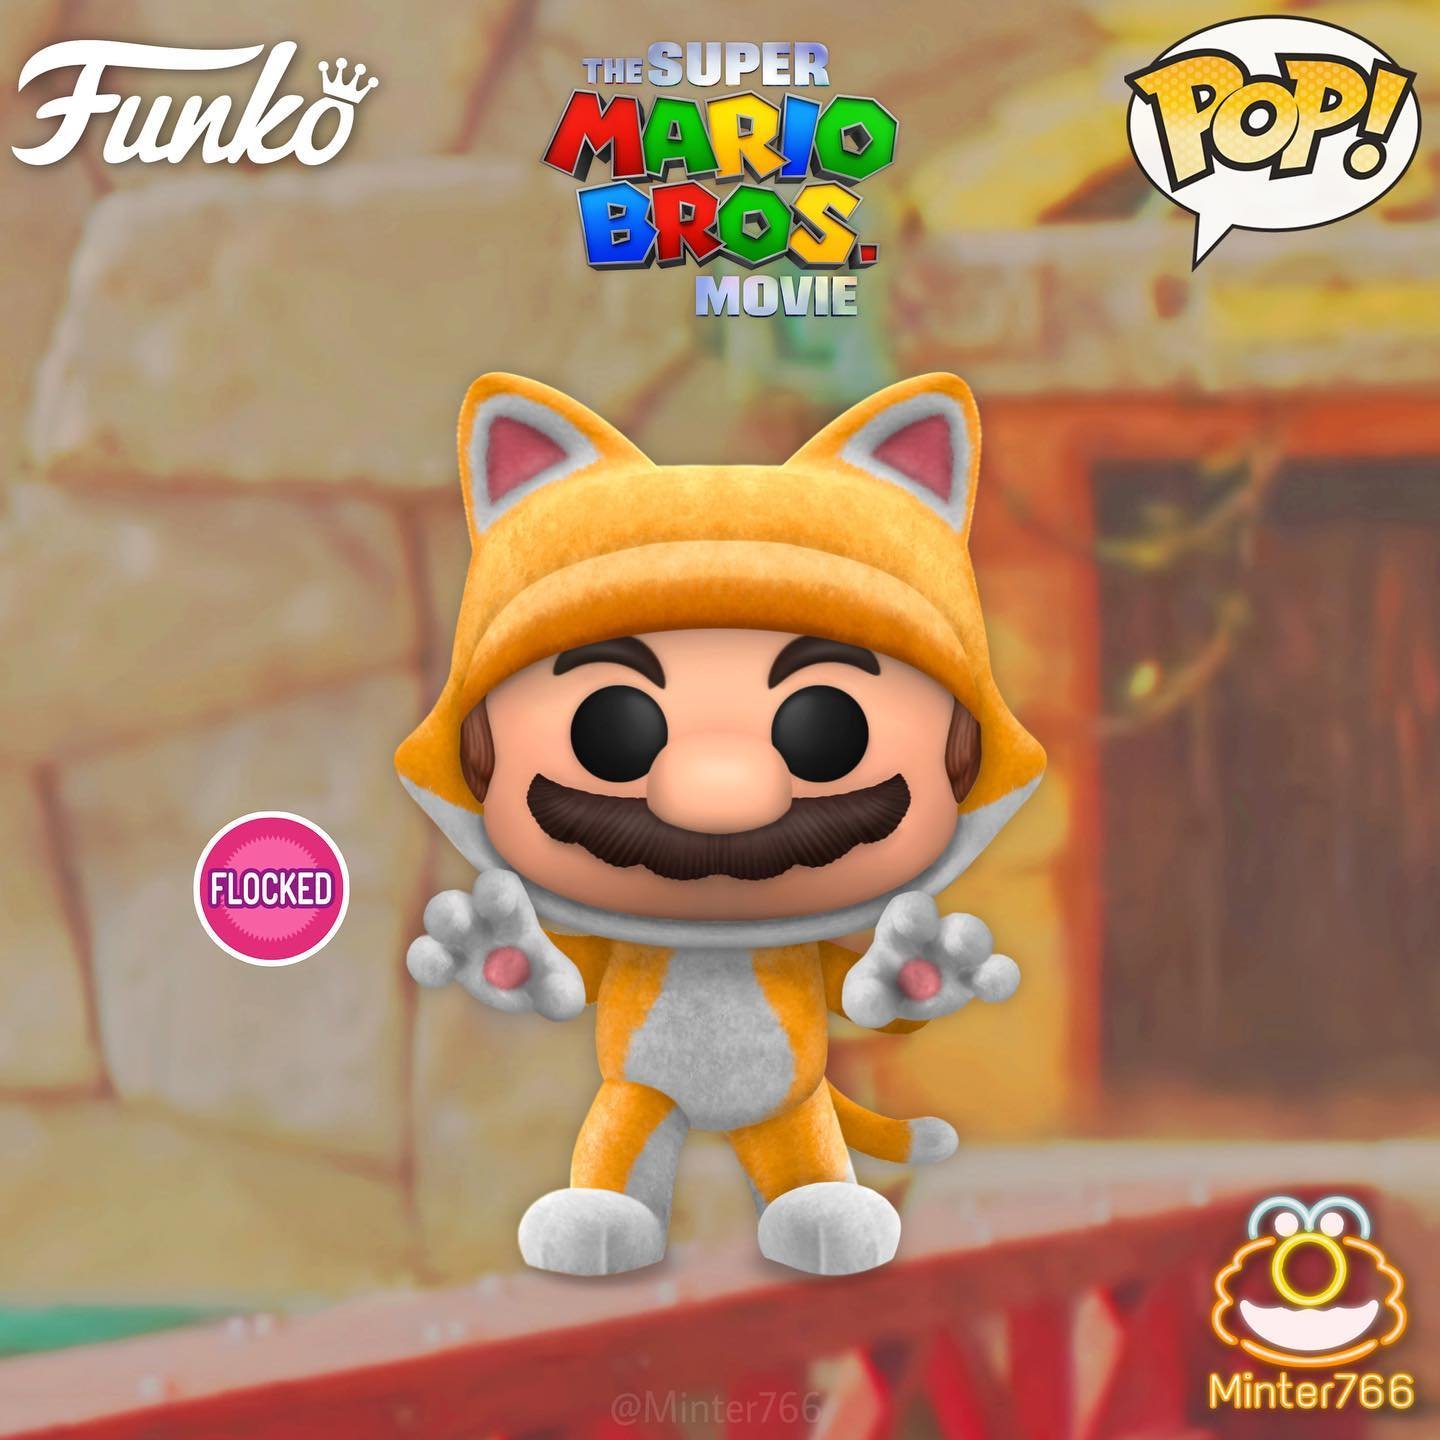 Funko Finderz on Twitter: "These are just concepts but just imagine chaos that would unfold if Funko announced Super Mario Pop! figures. Credit: https://t.co/aRda0sr15F #MAR10 #Funko #FunkoPop #FunkoPopVinyl #Pop #PopVinyl #Collectibles #